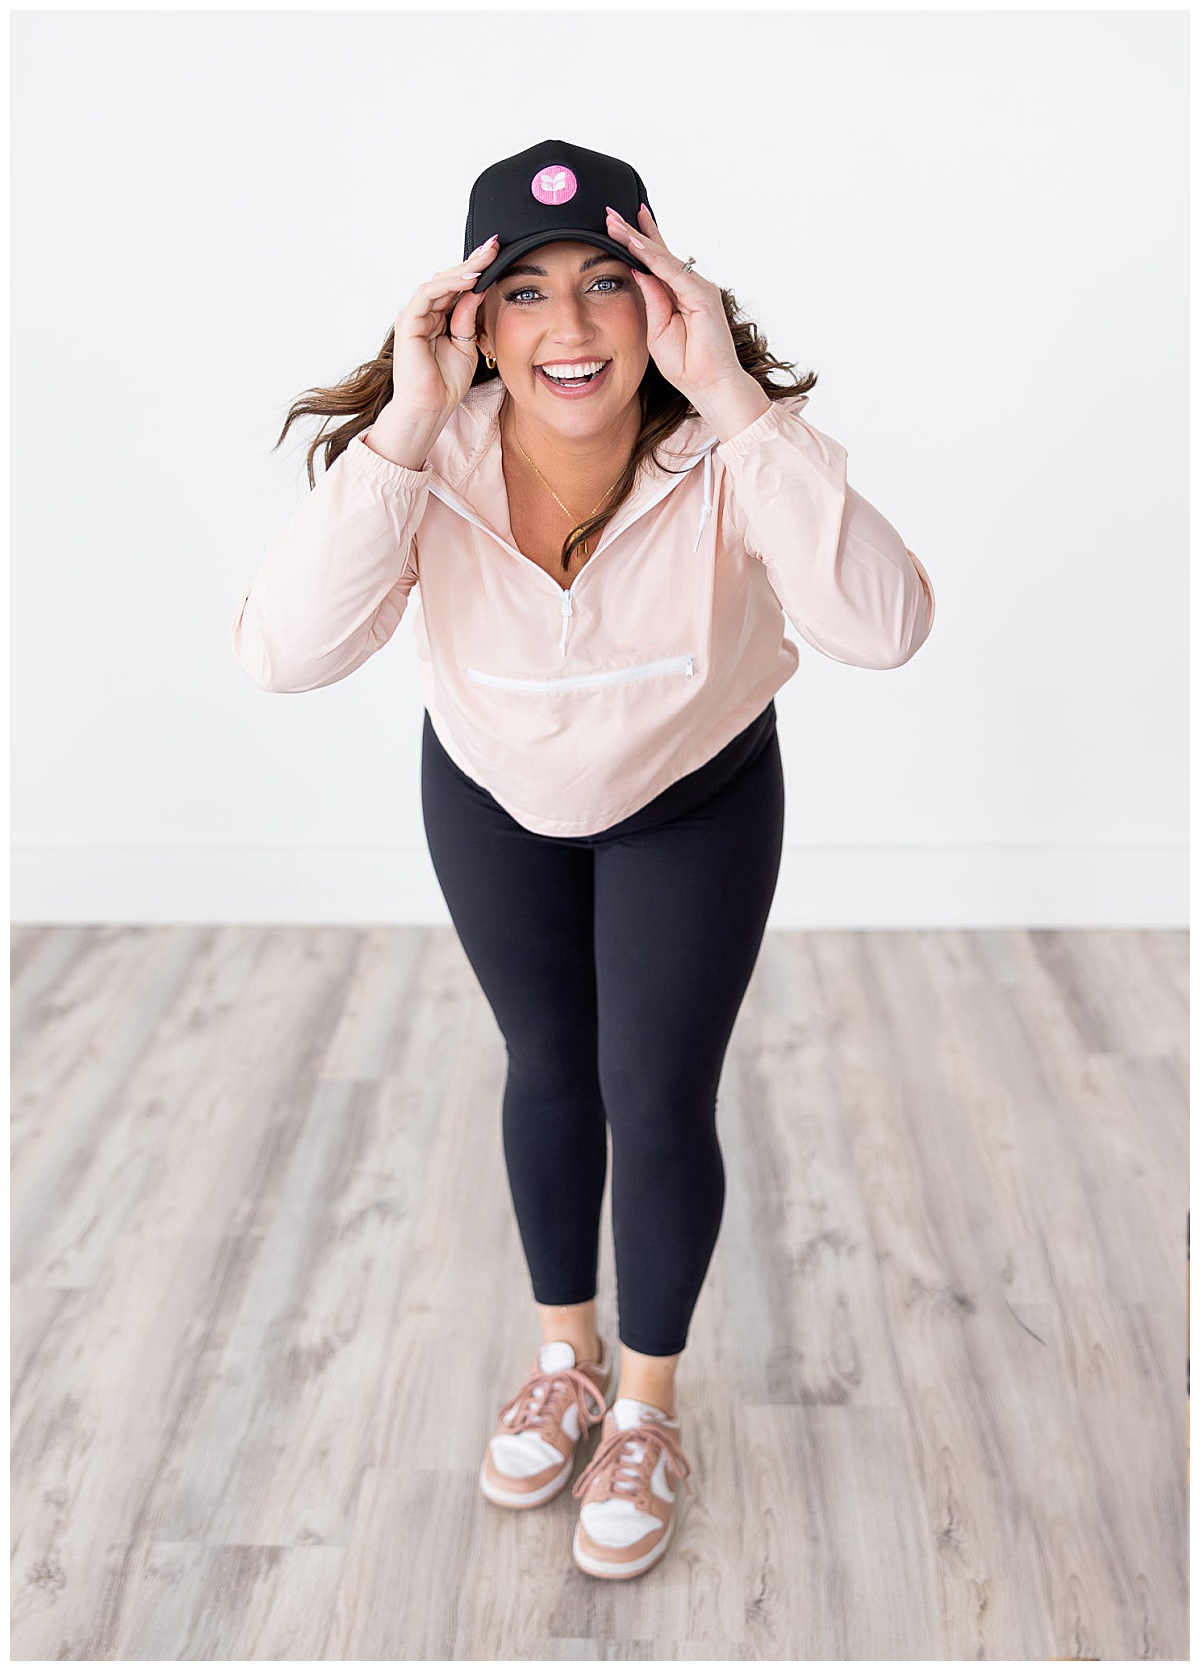 Dark haired beauty influencer, Tara Geltel, smiles before a bright white background wearing black leggings, a pastel pink pull over, and a baseball cap during a branding photoshoot with Williston, North Dakota brand photographer, Kellie Rochelle Photography.